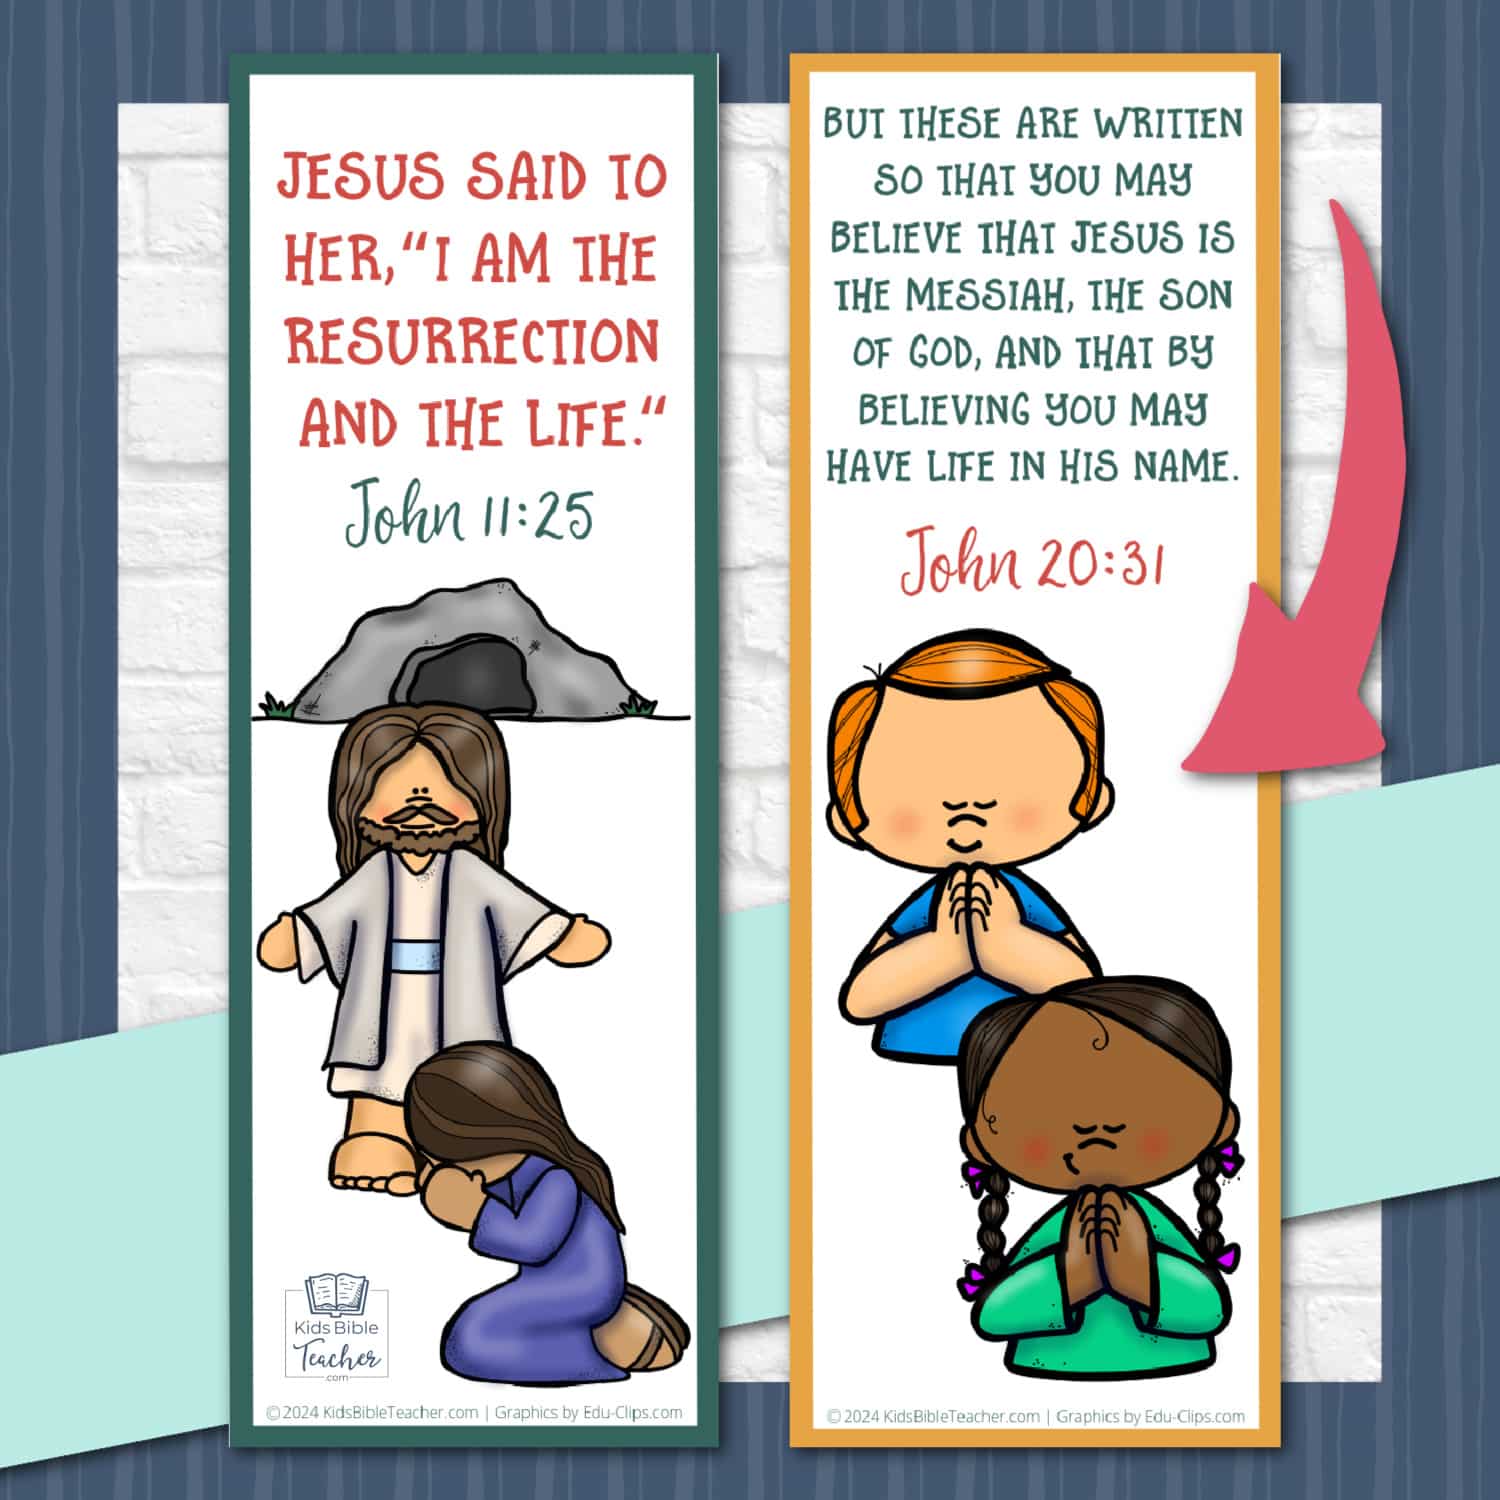 Jesus' Resurrection Easter Craft Bookmarks showing Bookmarks with John 11:25 and John 20:31